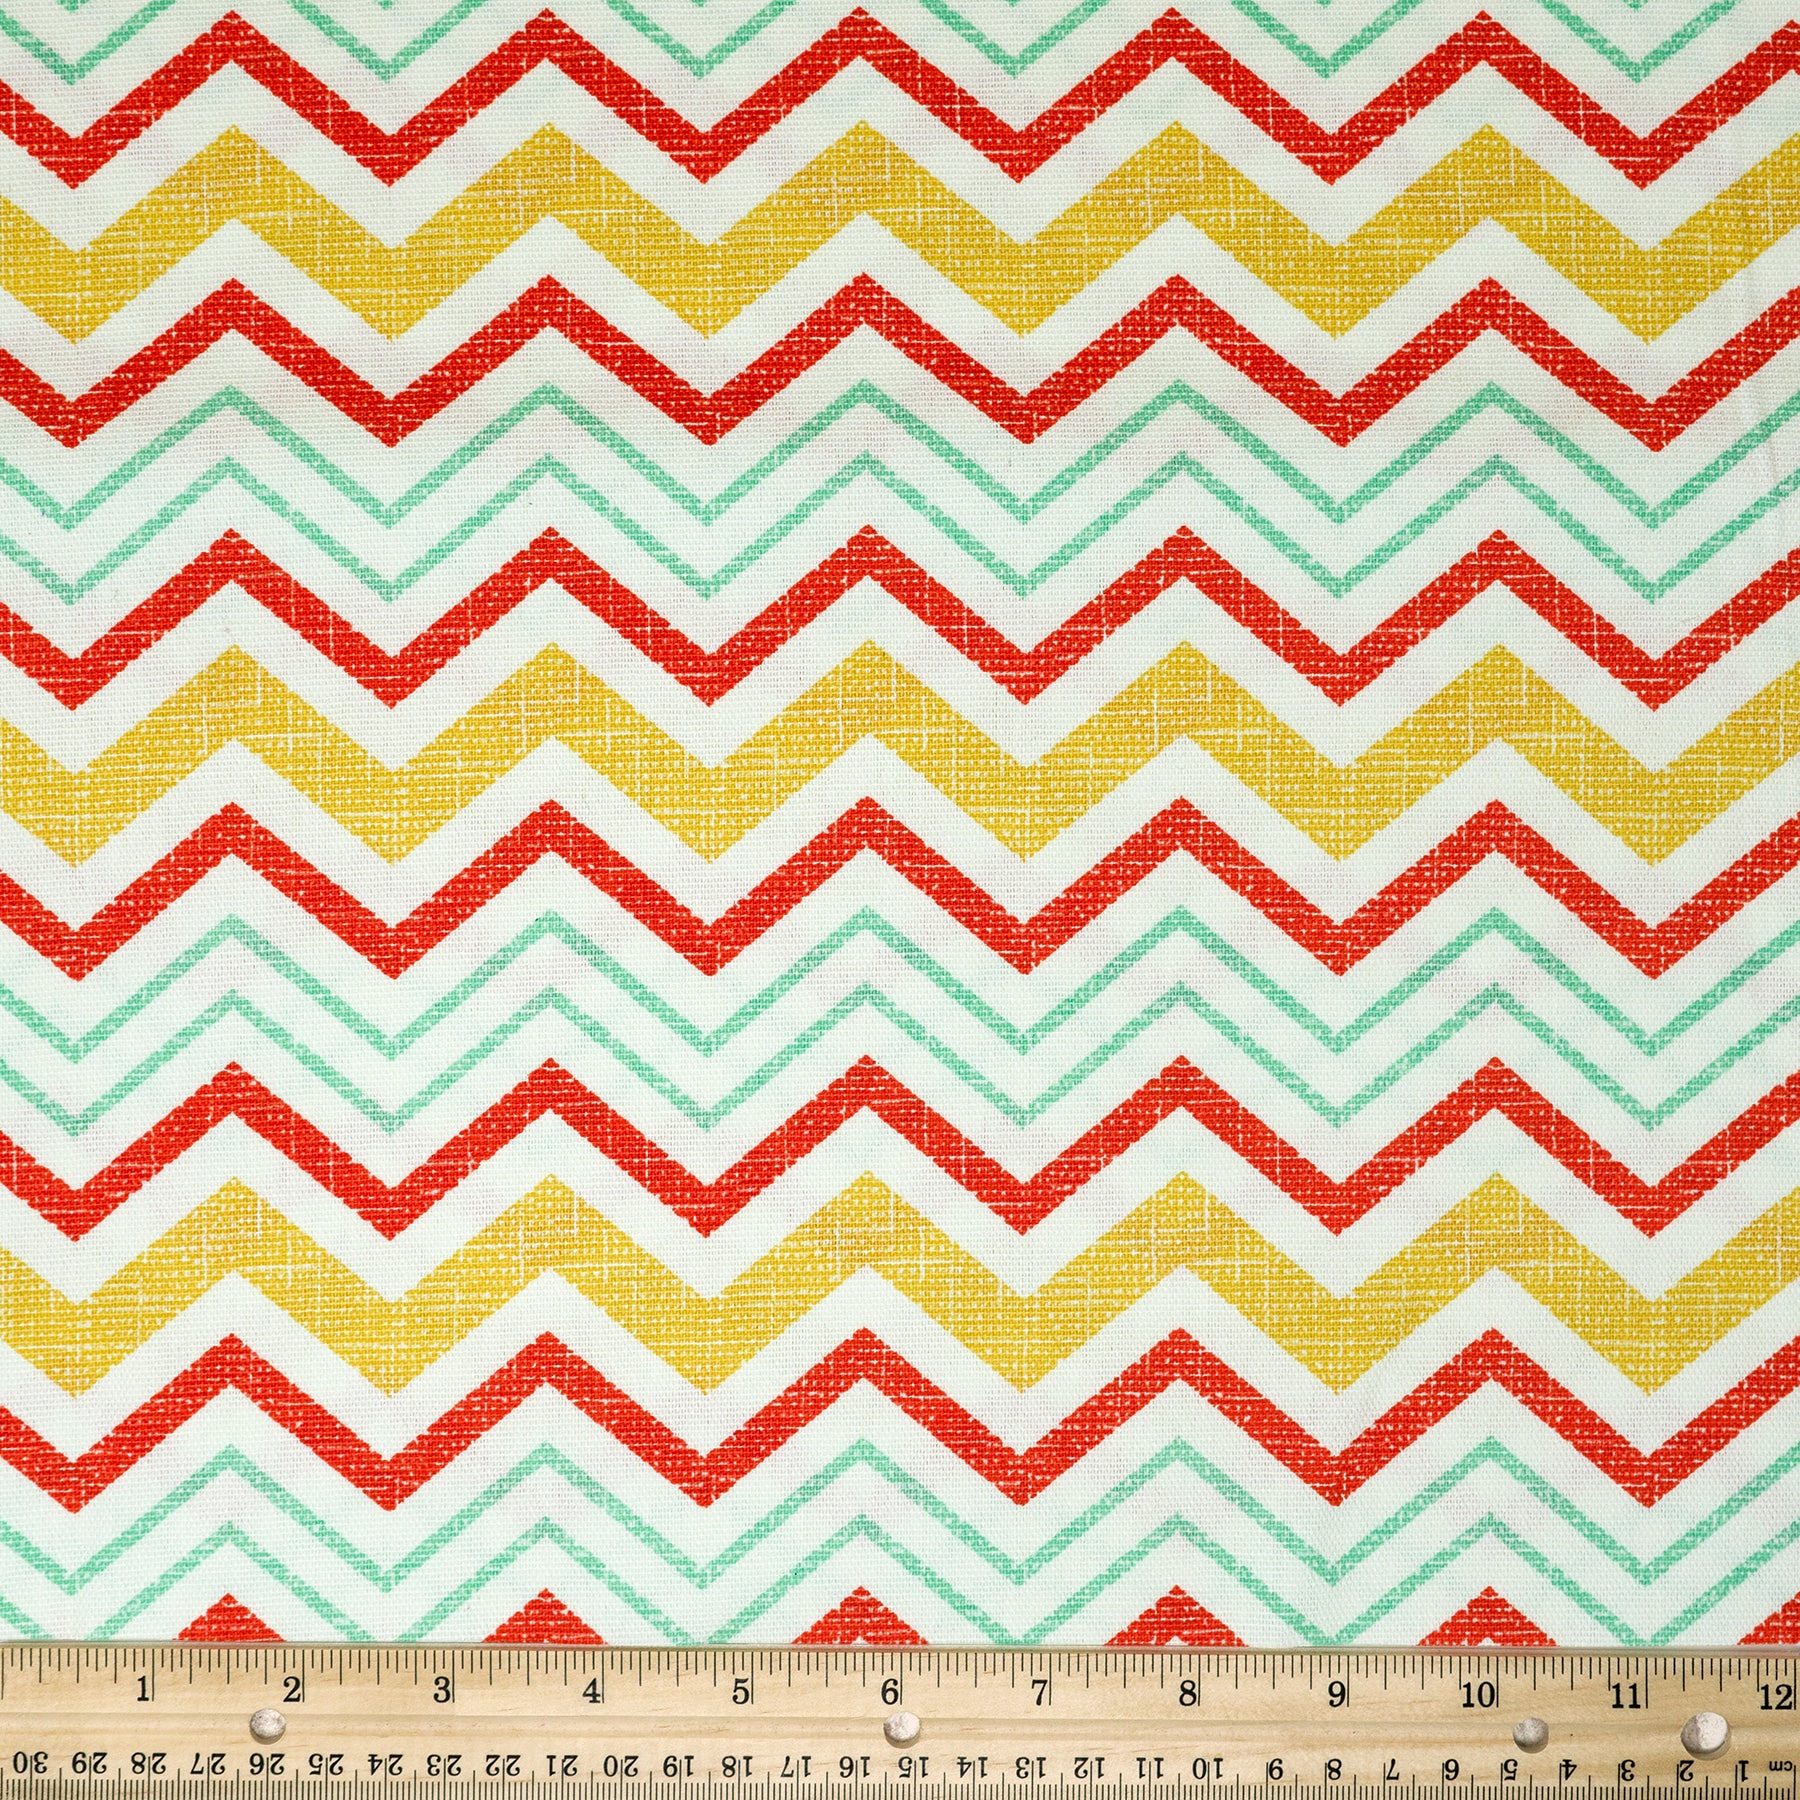 Waverly Inspirations 100% Cotton Duck 45" Width Chevron Papaya Color Sewing Fabric by the Yard